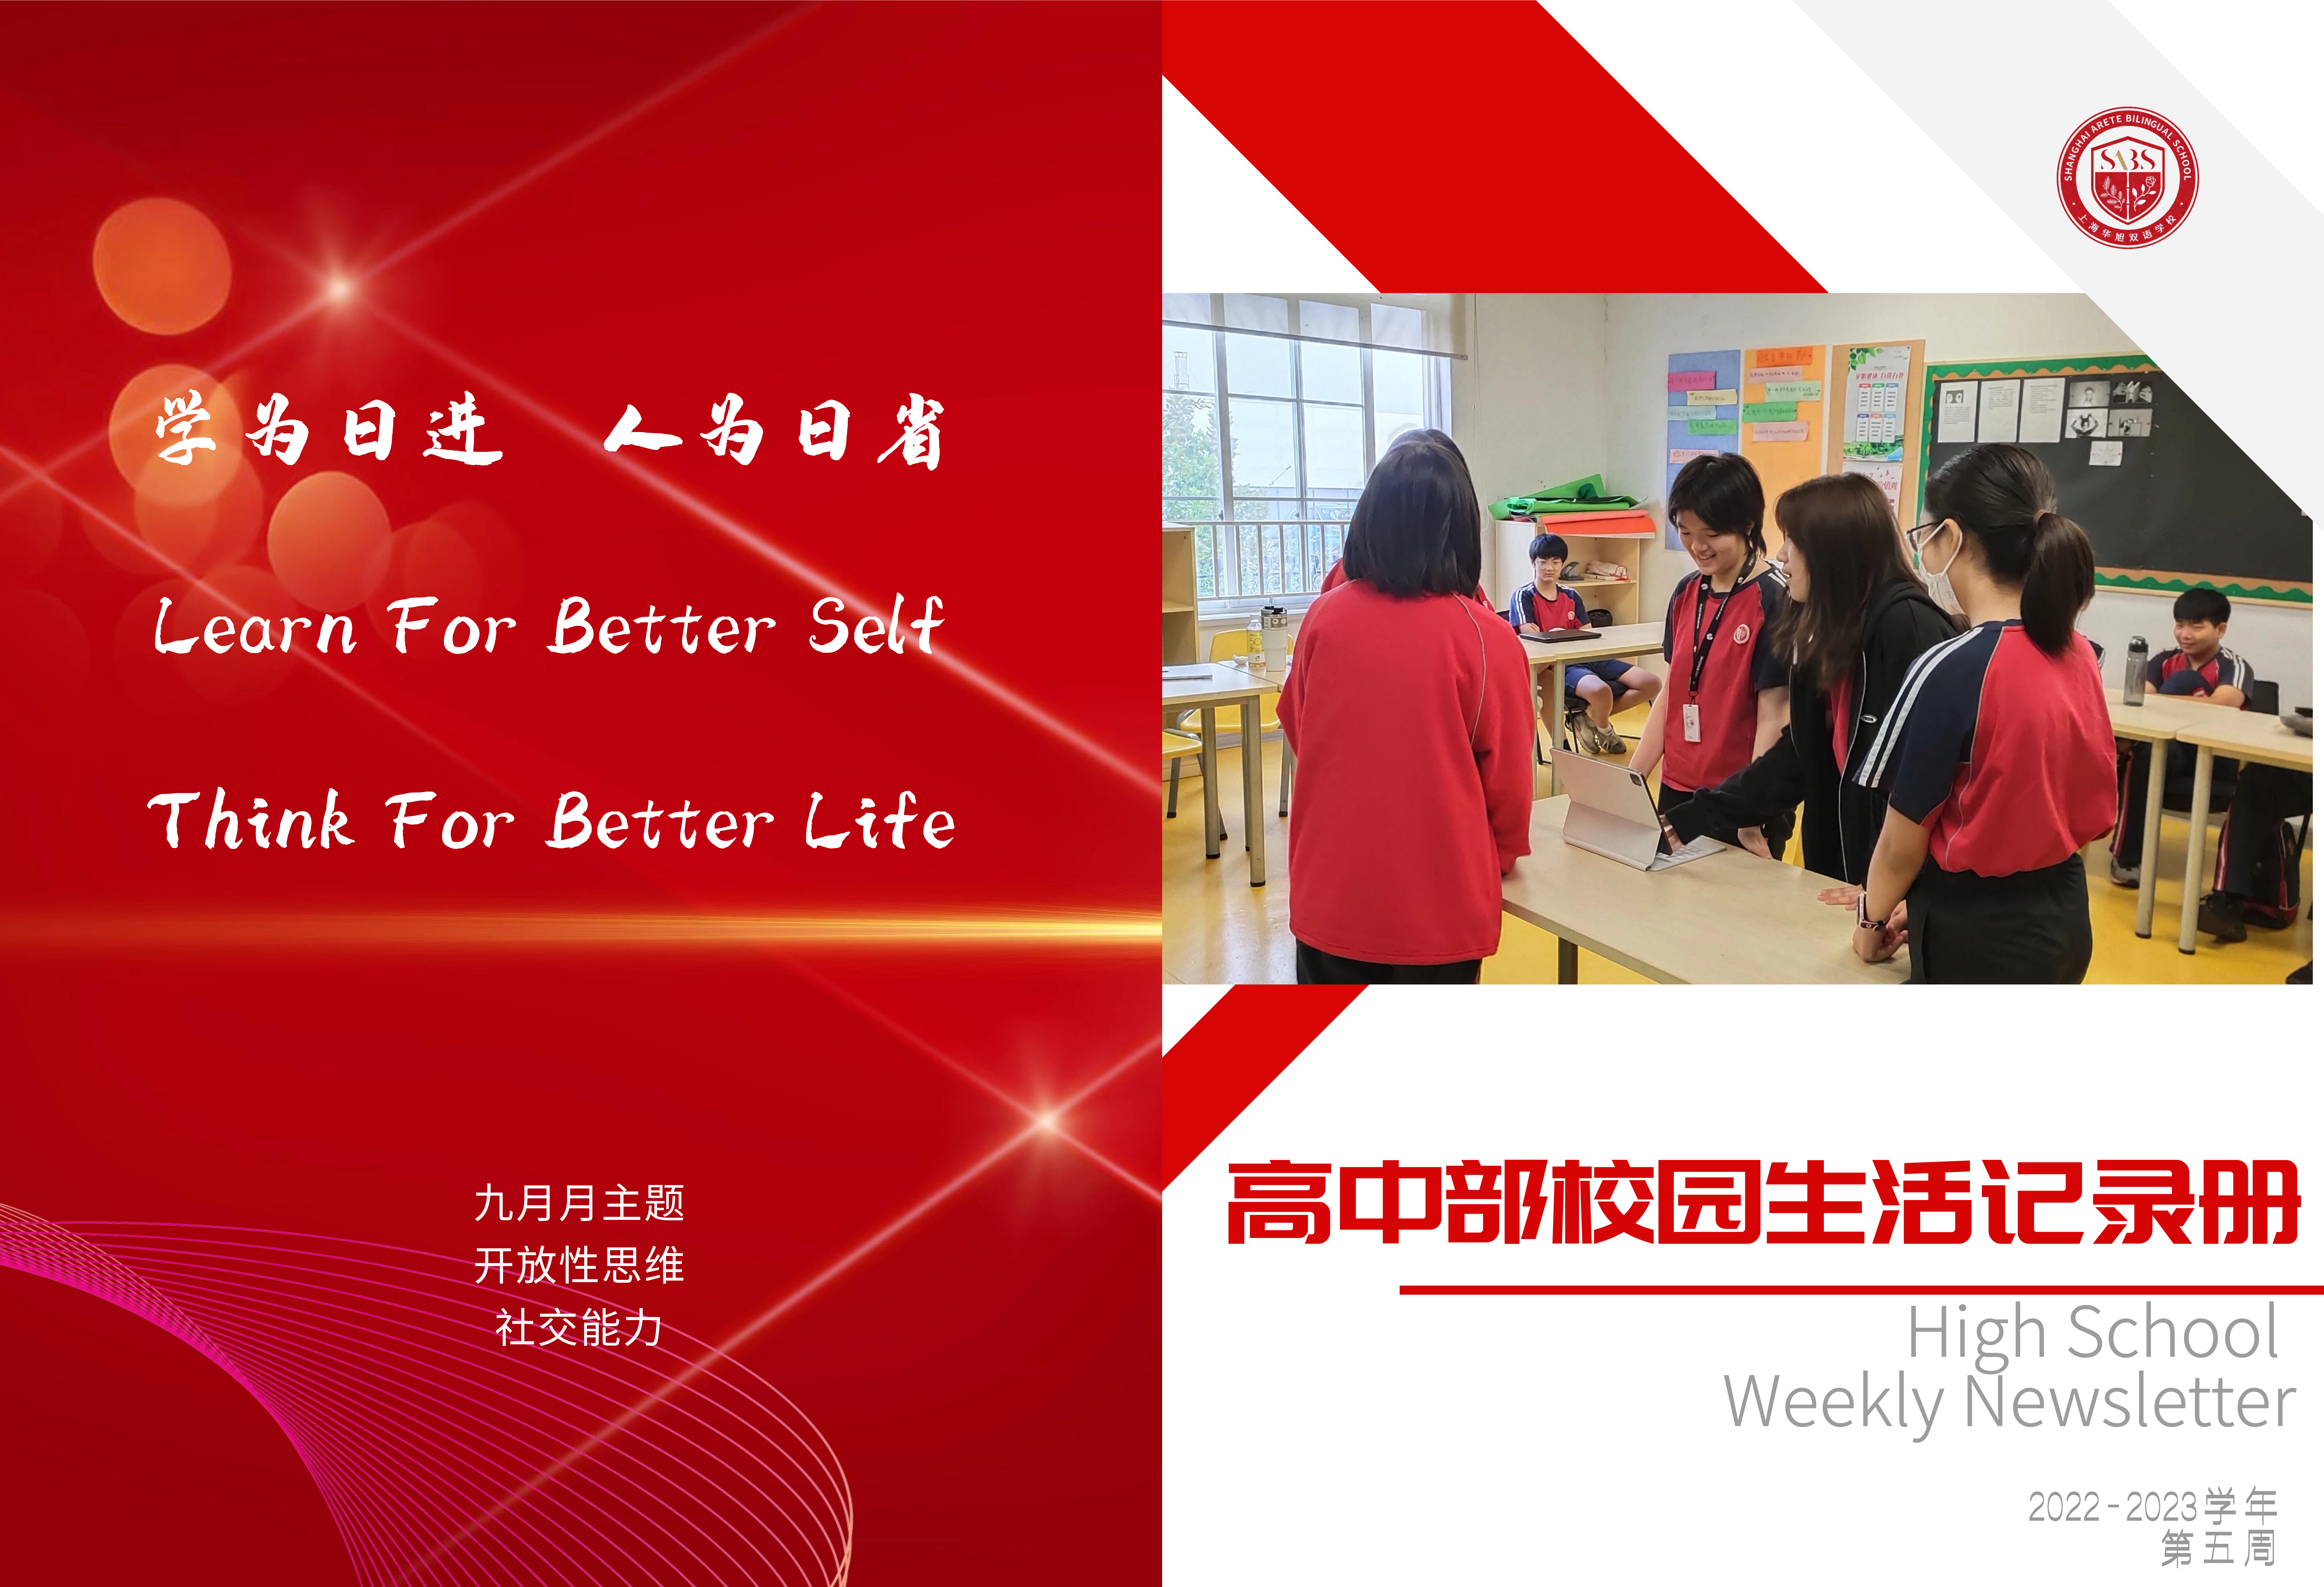 HS 5th Week Newsletter (Chinese 2022-2023 1st semester)_00.png